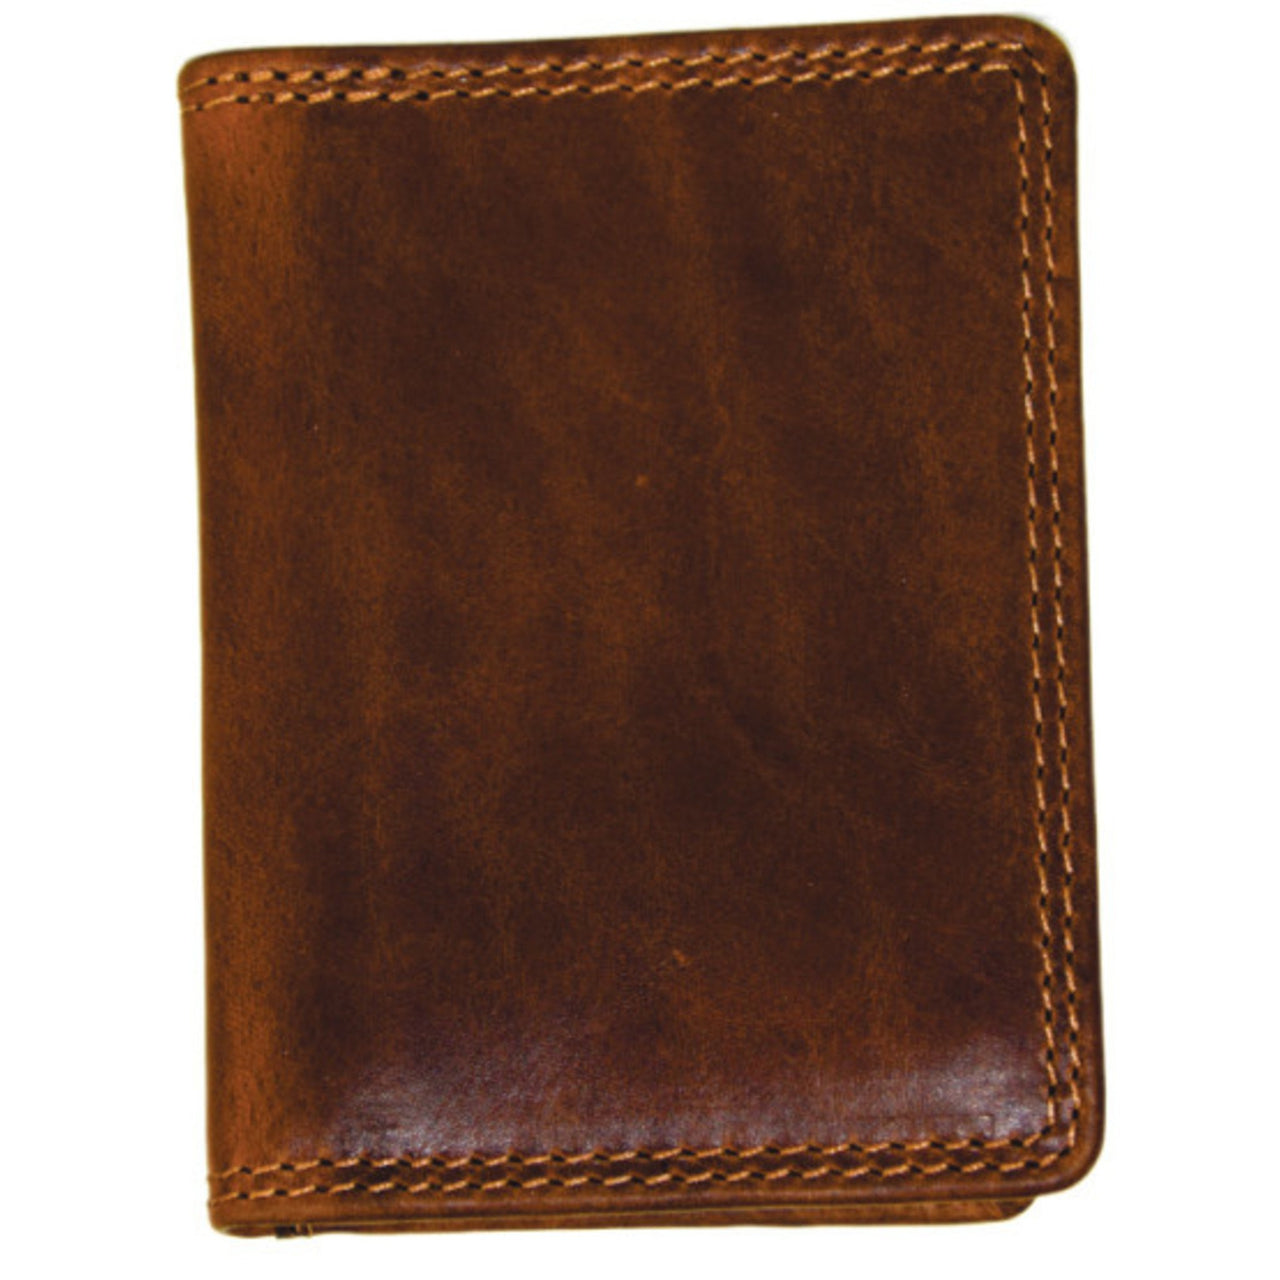 Rugged Earth Women's Leather Card Holder Wallet